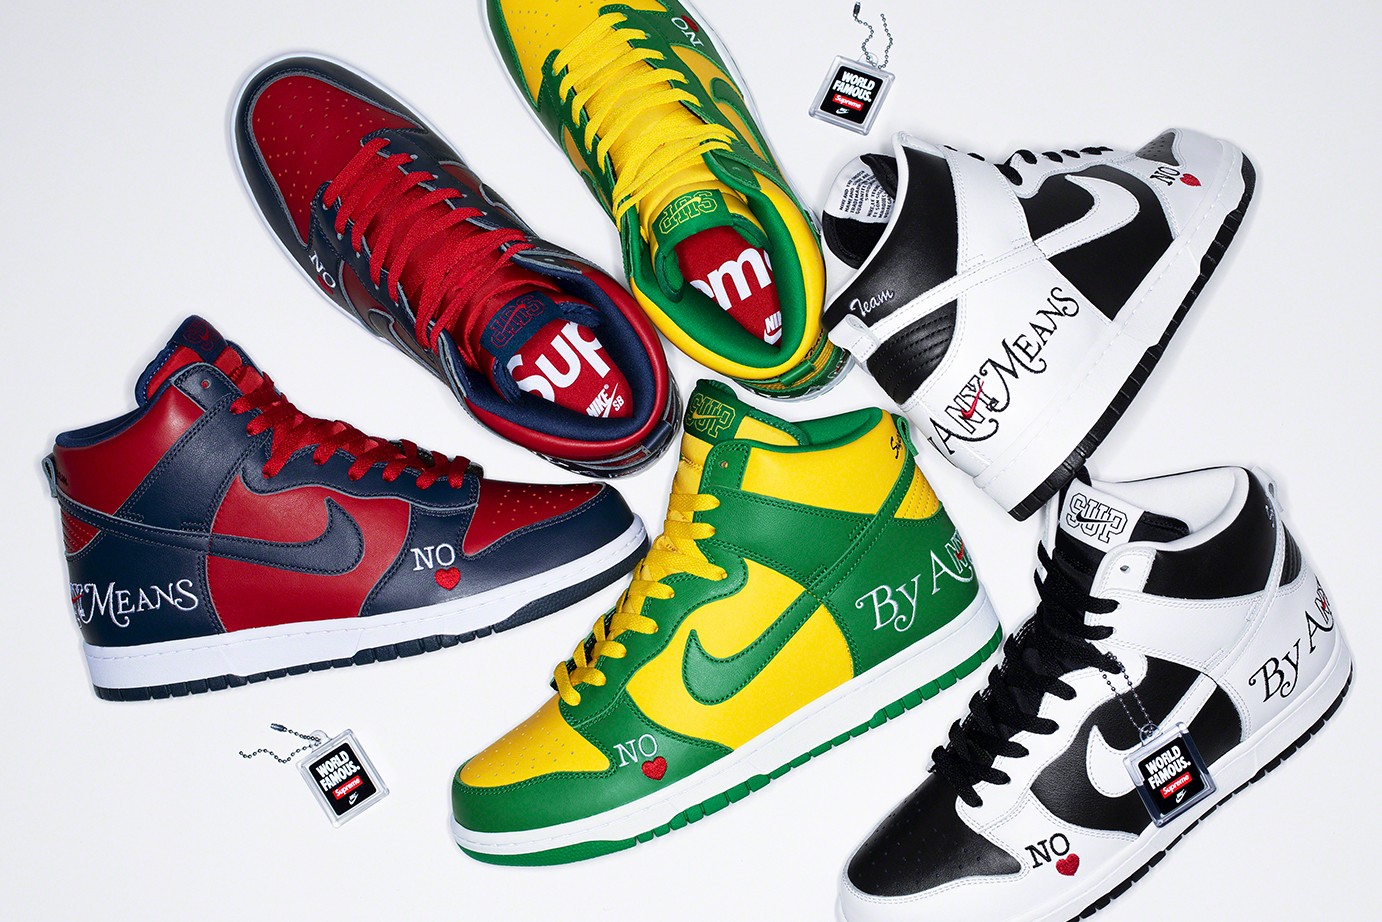 Supreme x Nike SB Dunk High Spring/Summer 2022 "By Any Means" sneakers